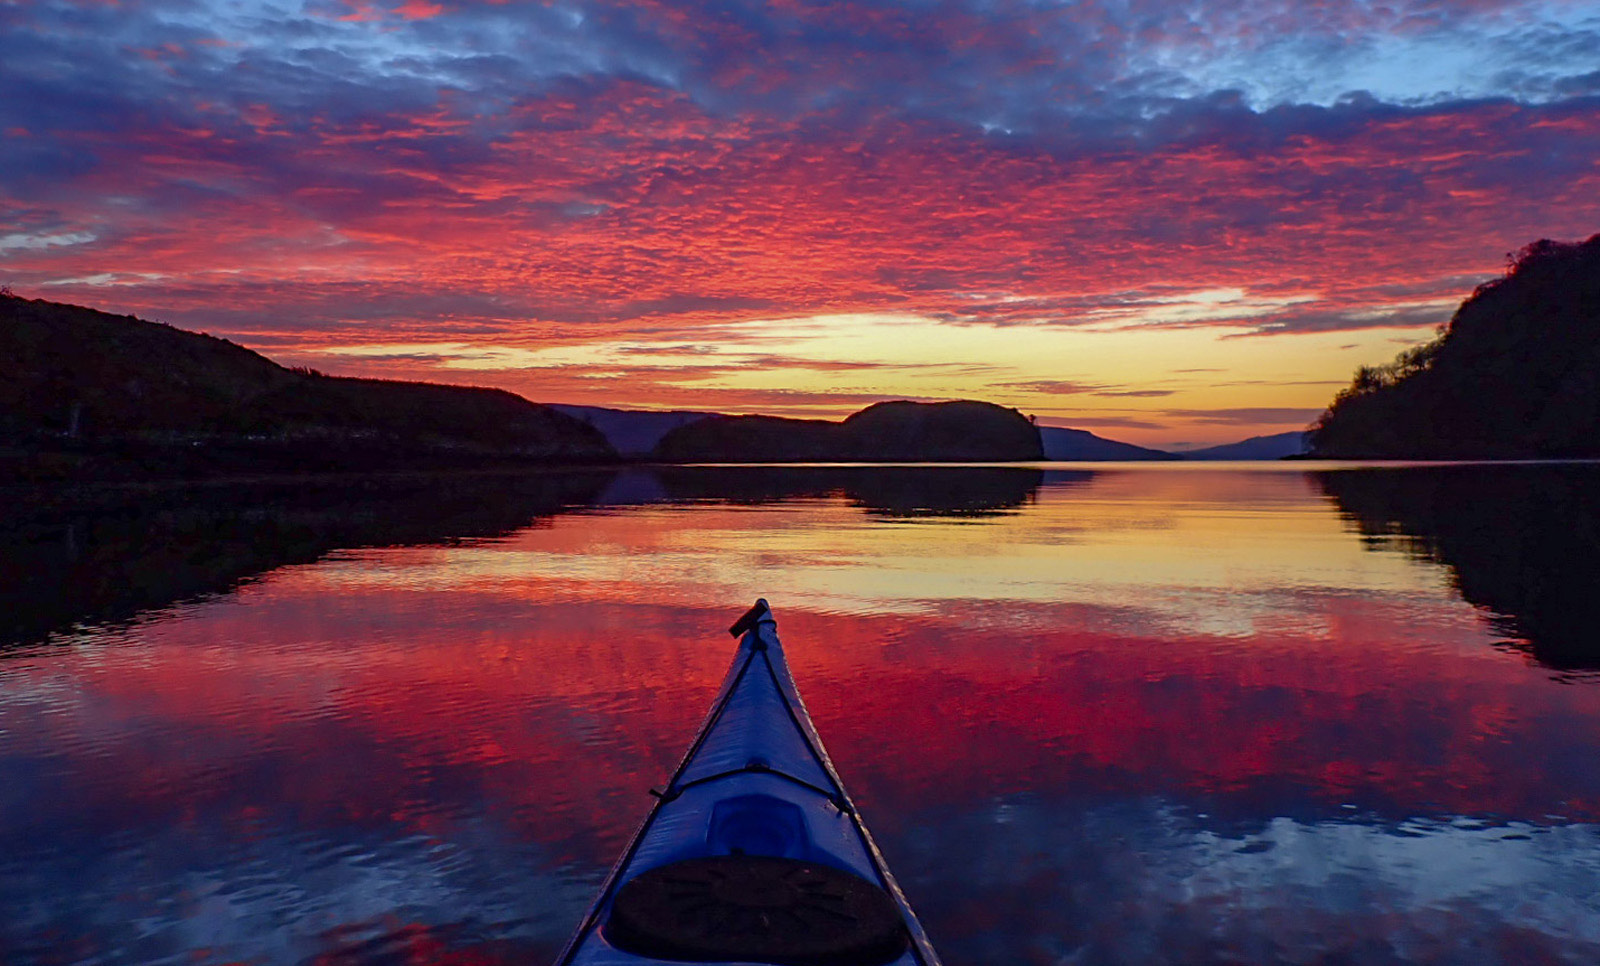 Red, purple, deep blue sunset sky with bow of kayak 